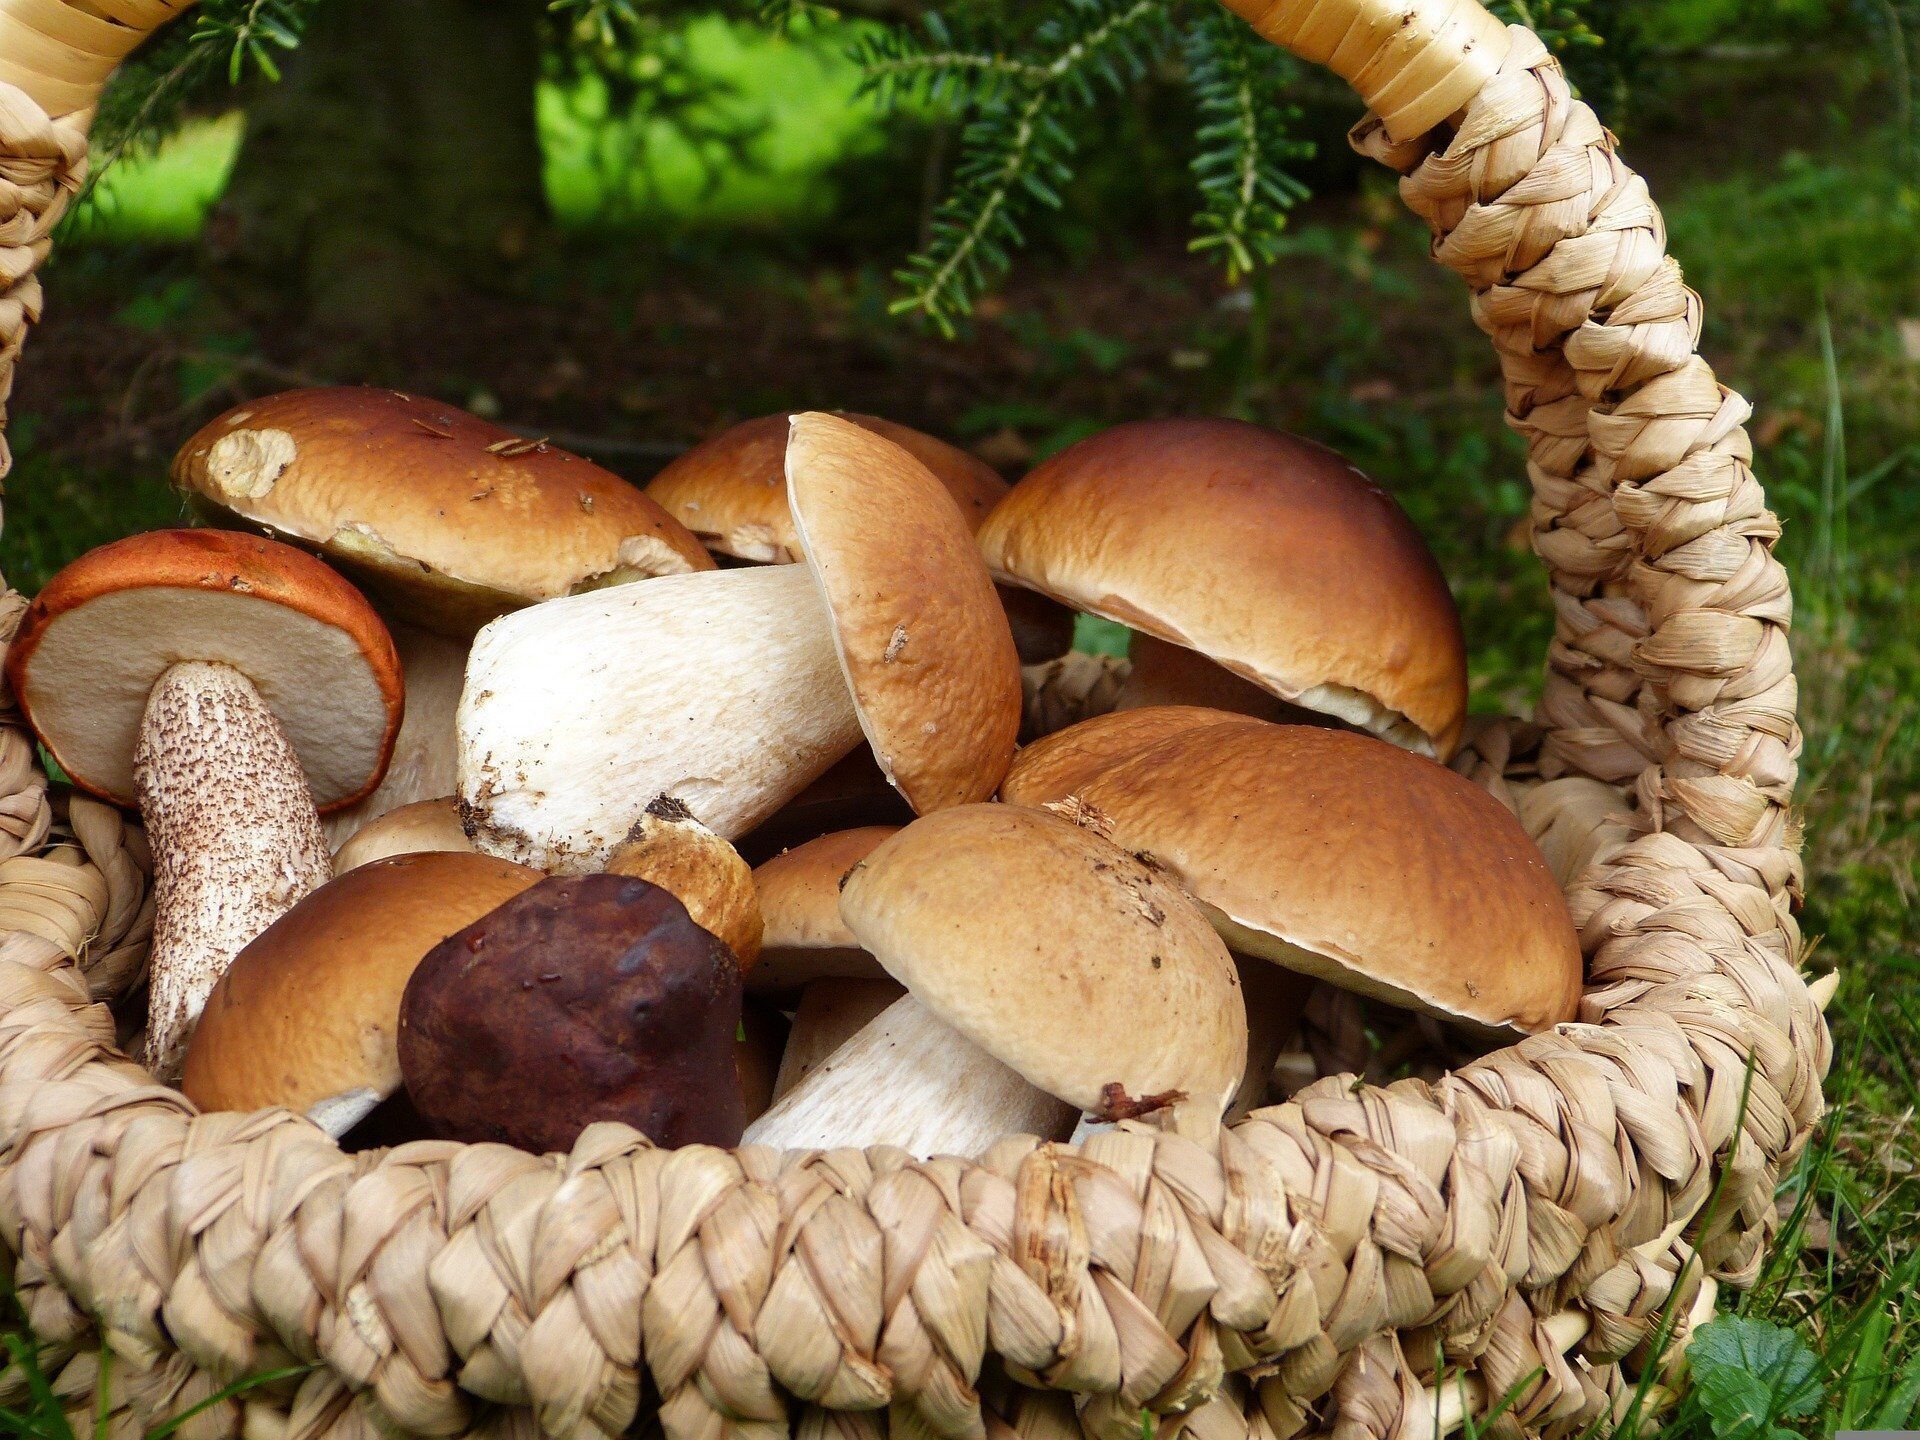 How to cook mushrooms deliciously